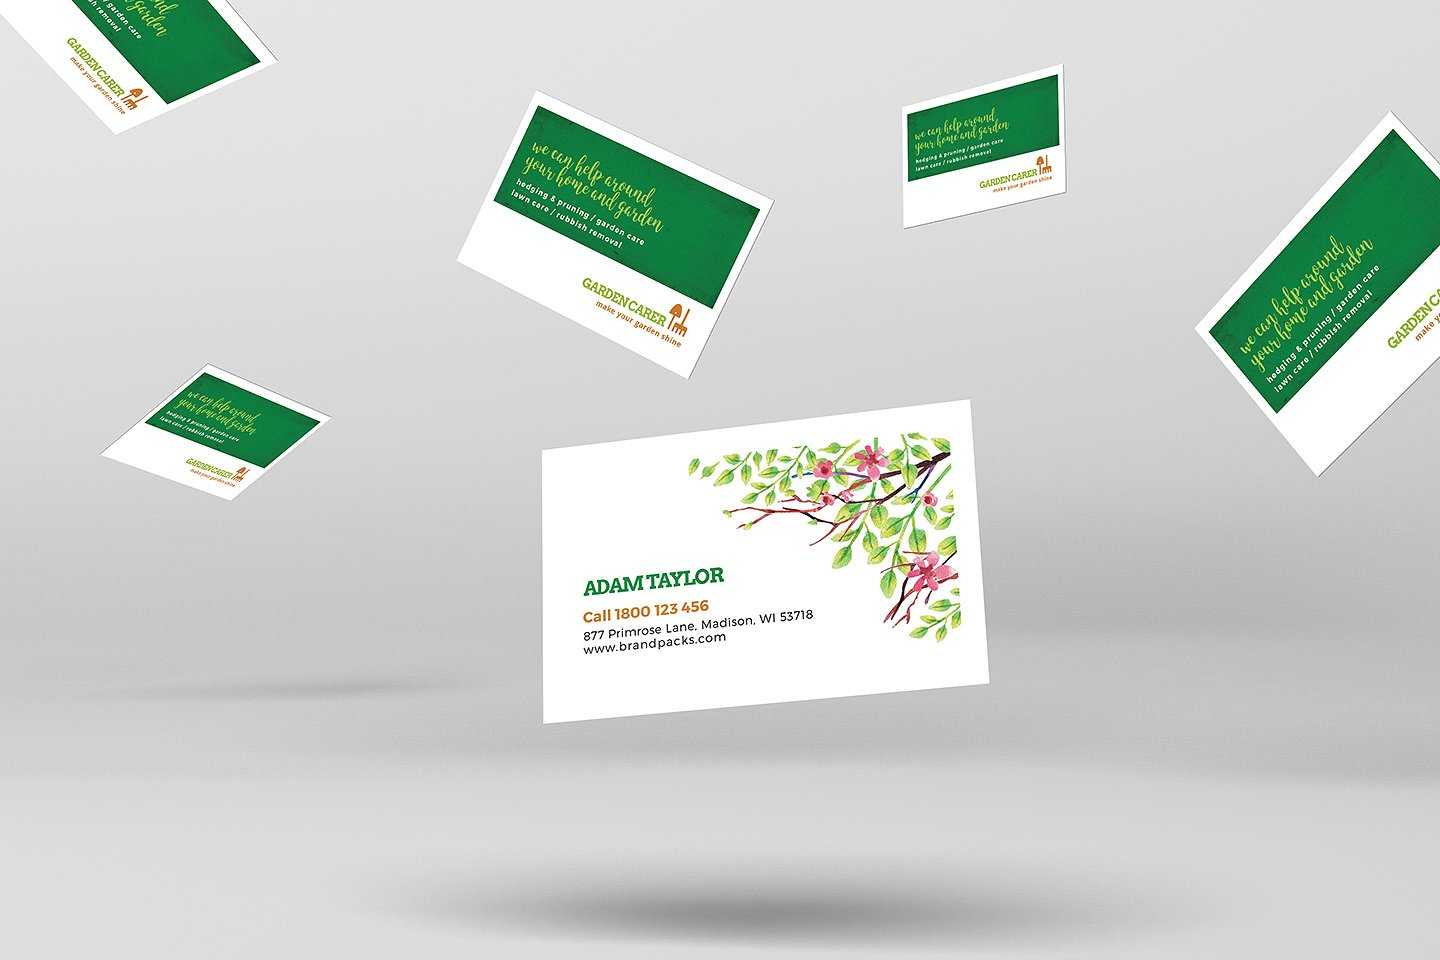 12+ Business Card Designs For Landscapers | Design Trends With Regard To Gardening Business Cards Templates